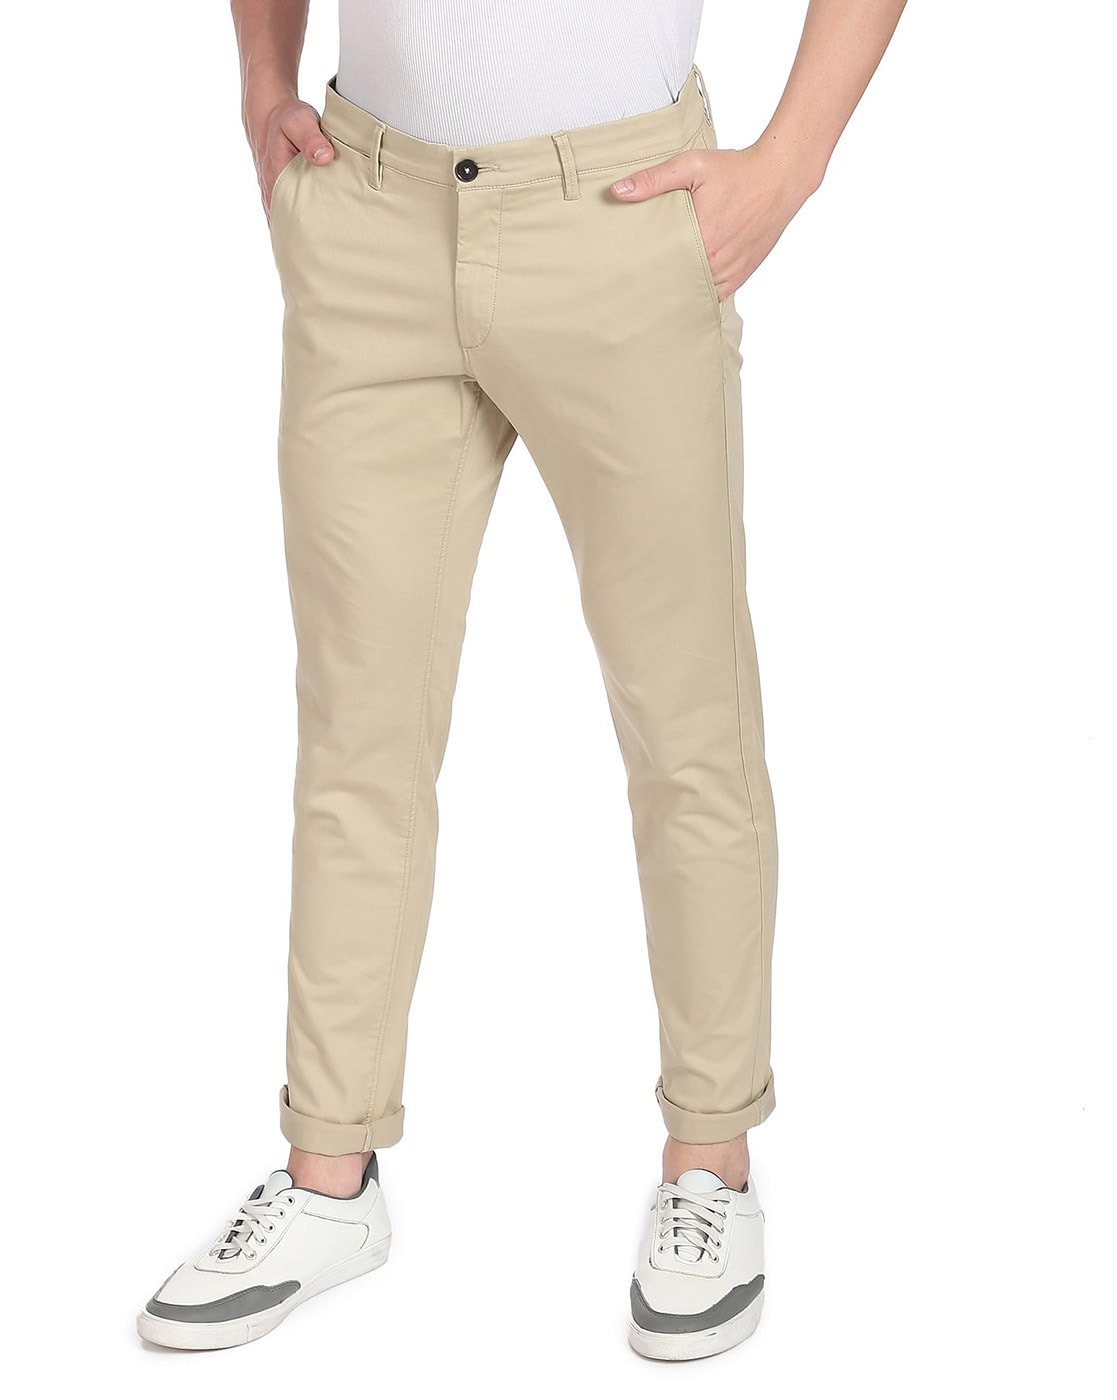 Buy Olive Green Trousers  Pants for Men by US Polo Assn Online   Ajiocom